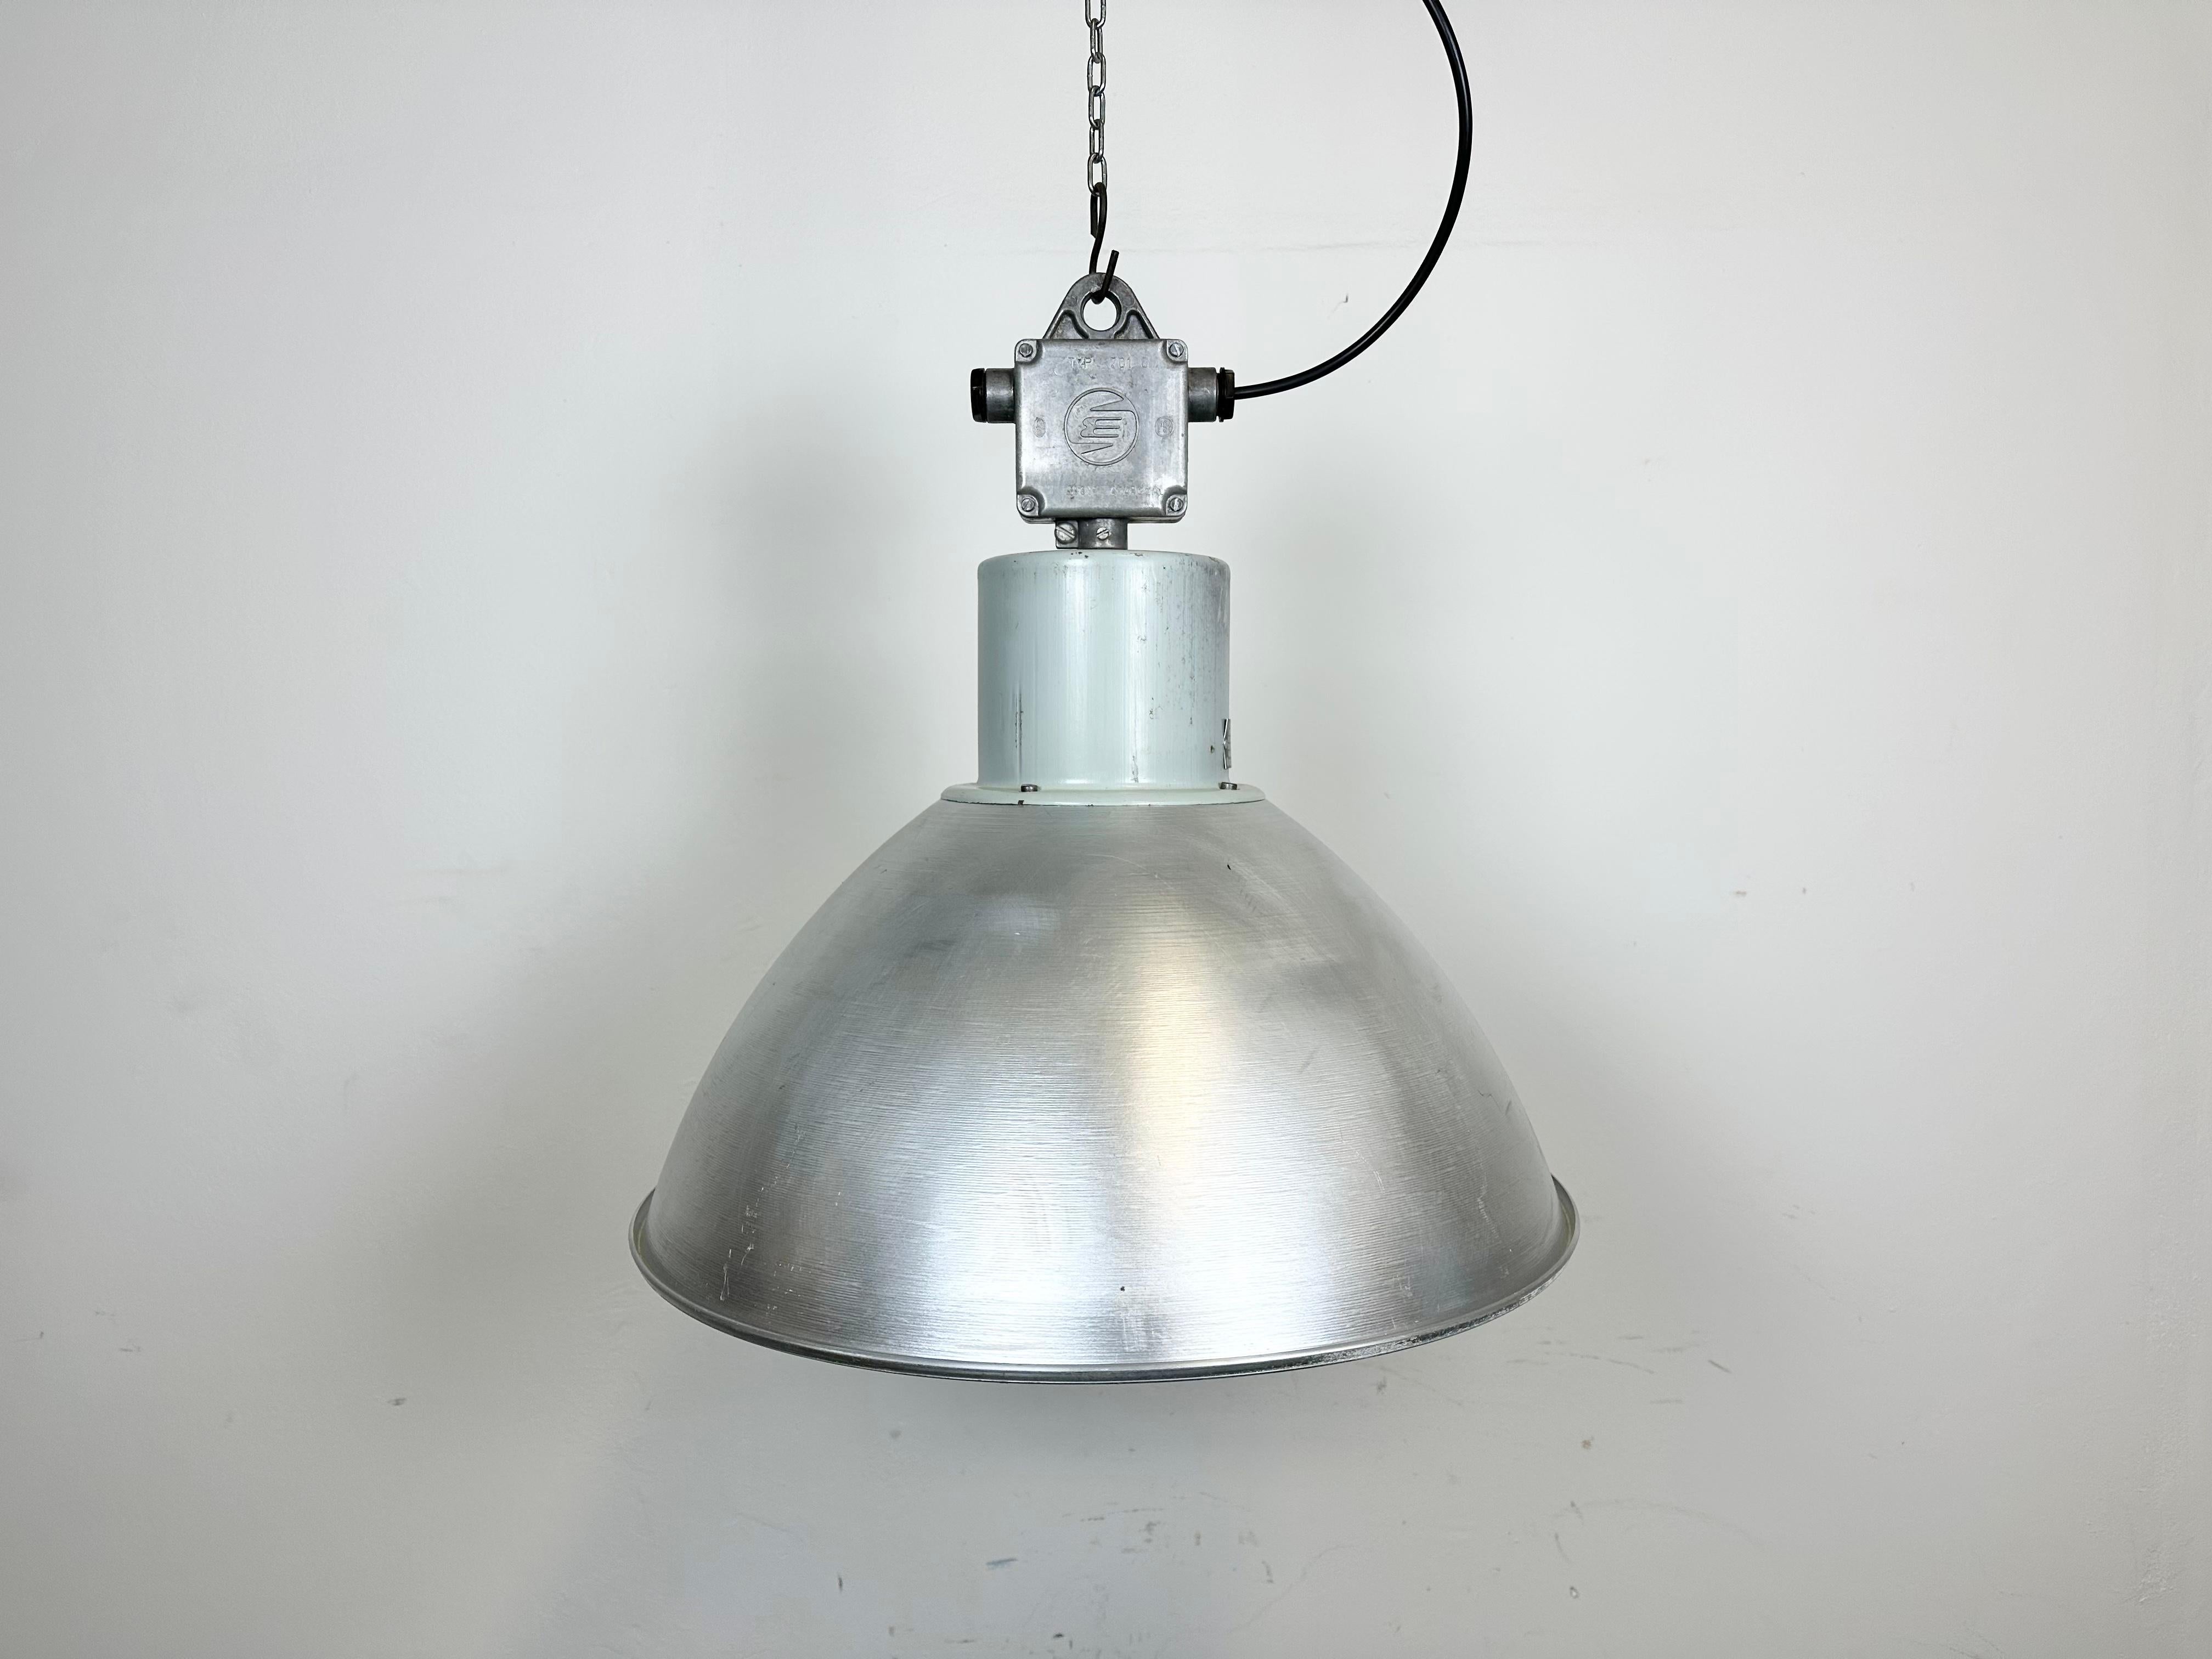 This pendant lamp was made by Elektrosvit and originally used in a factory in former Czechoslovakia in the 1960s. The piece is comprised of an aluminum lampshade and an iron top with cast aluminum box. The lamp is fully functional and features a new